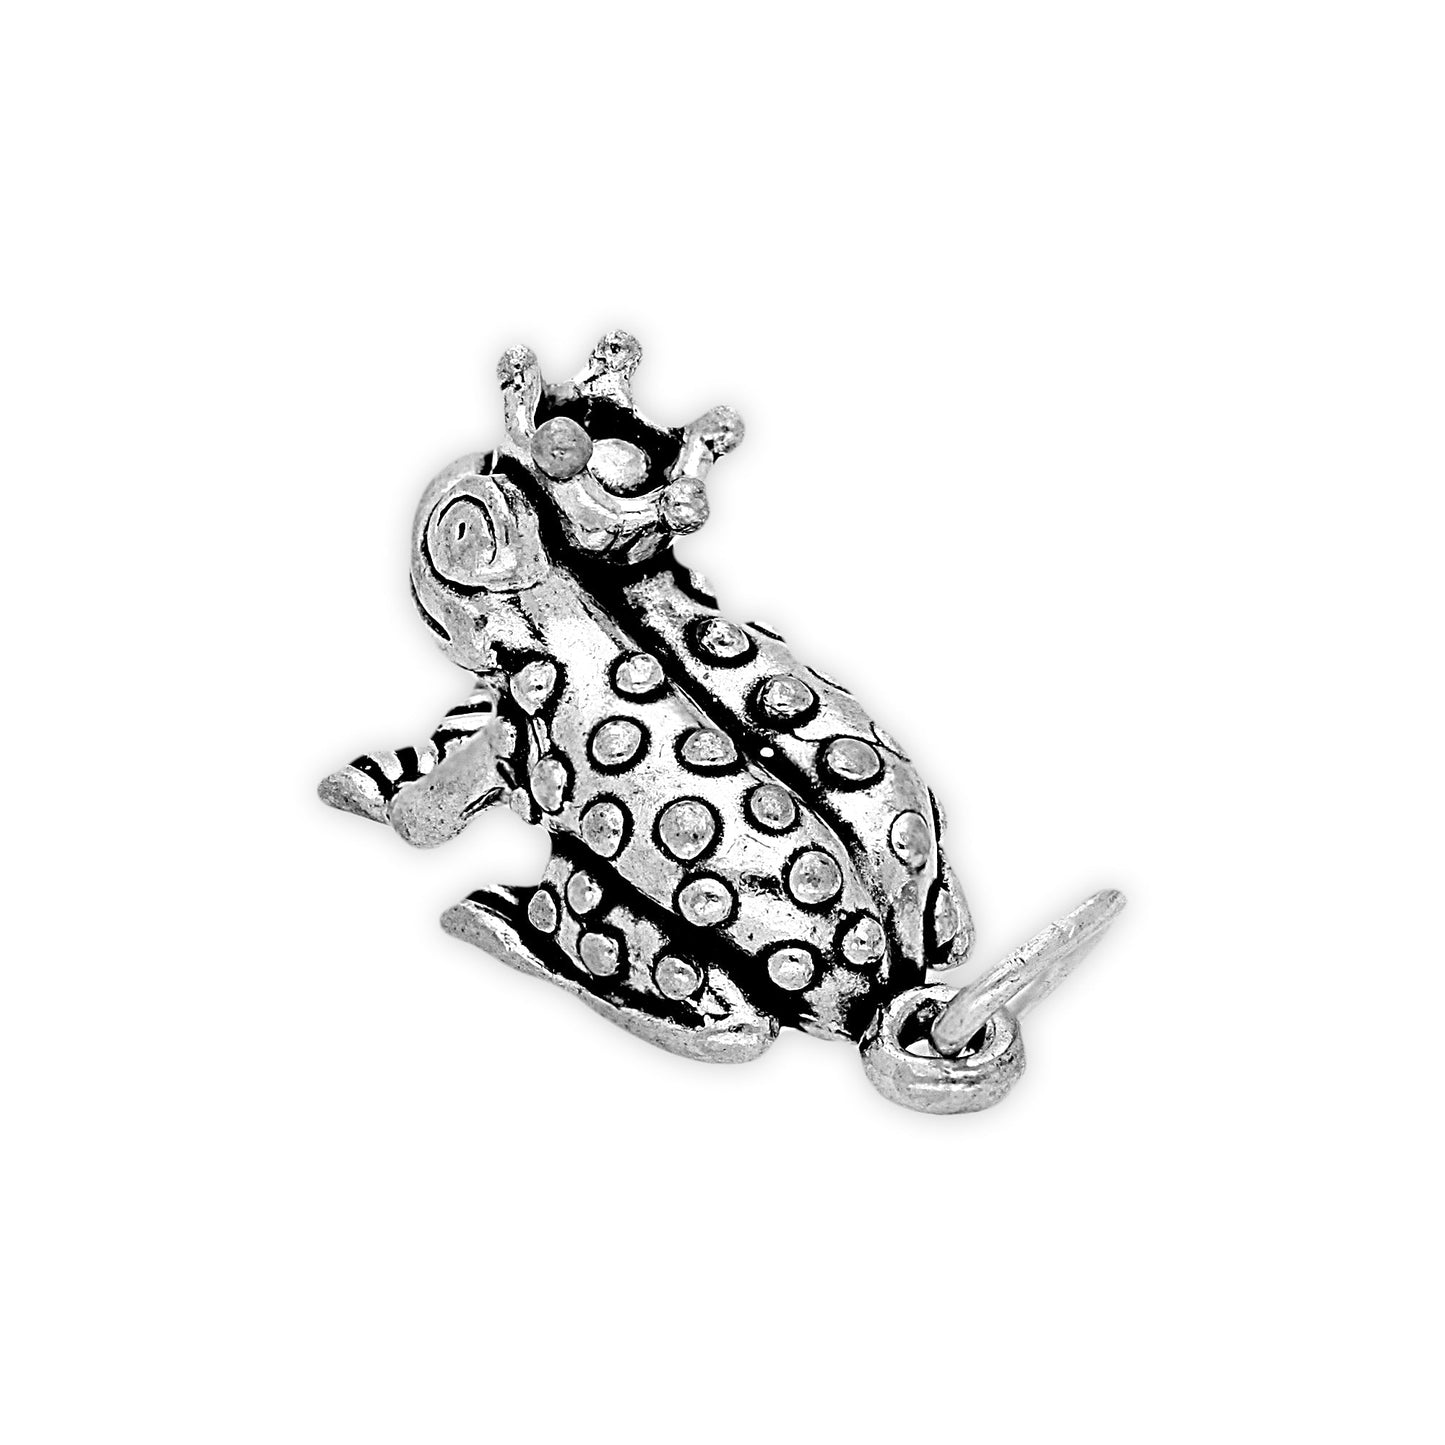 Sterling Silver Frog Prince Charm